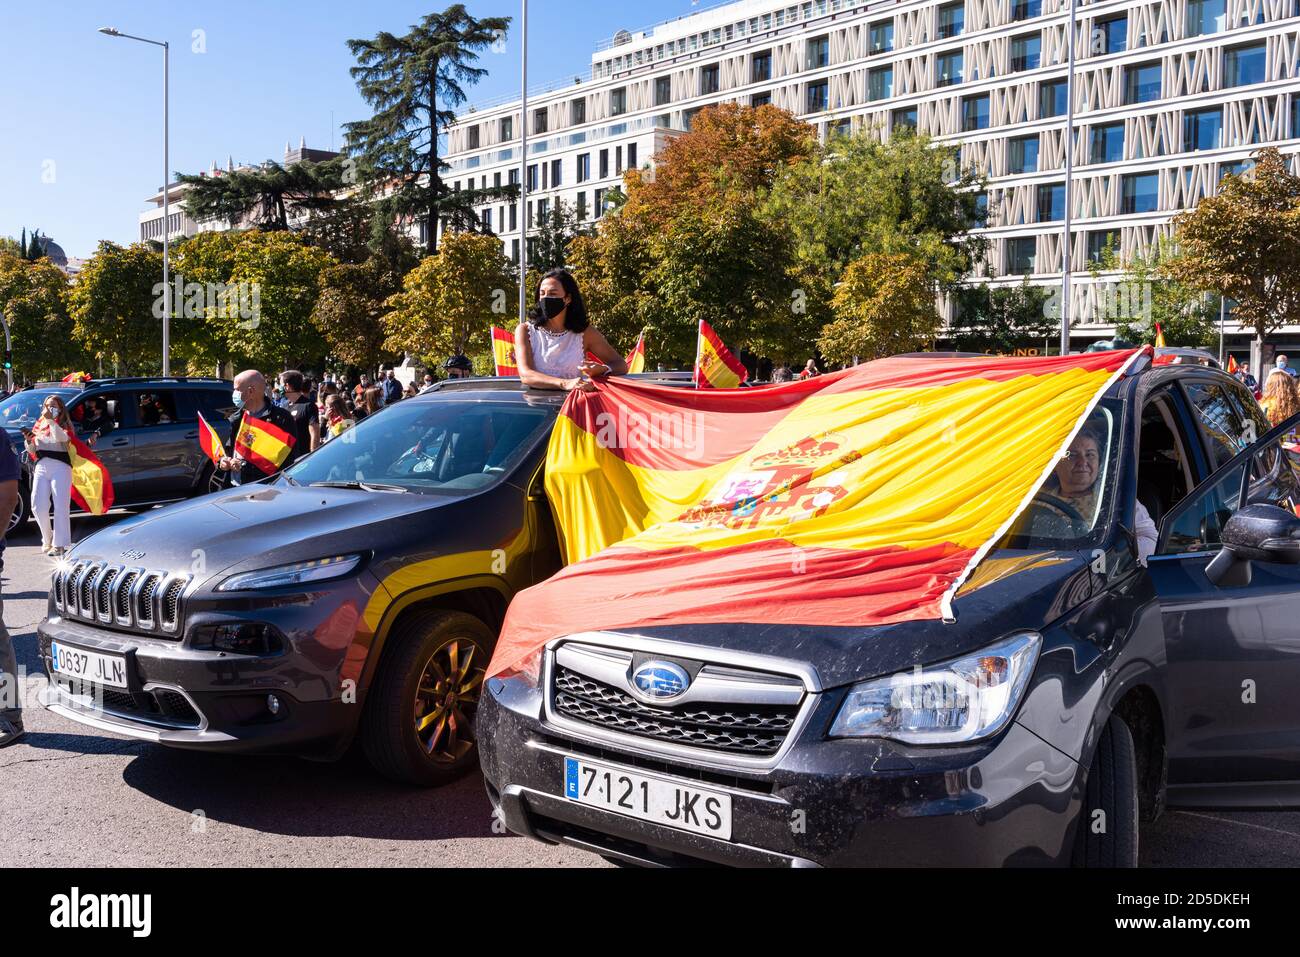 Madrid, Spain, 12th oct 2020. Woman holding flag as she attends a car parade protest against Spanish government's handling of the COVID-19 crisis. Stock Photo